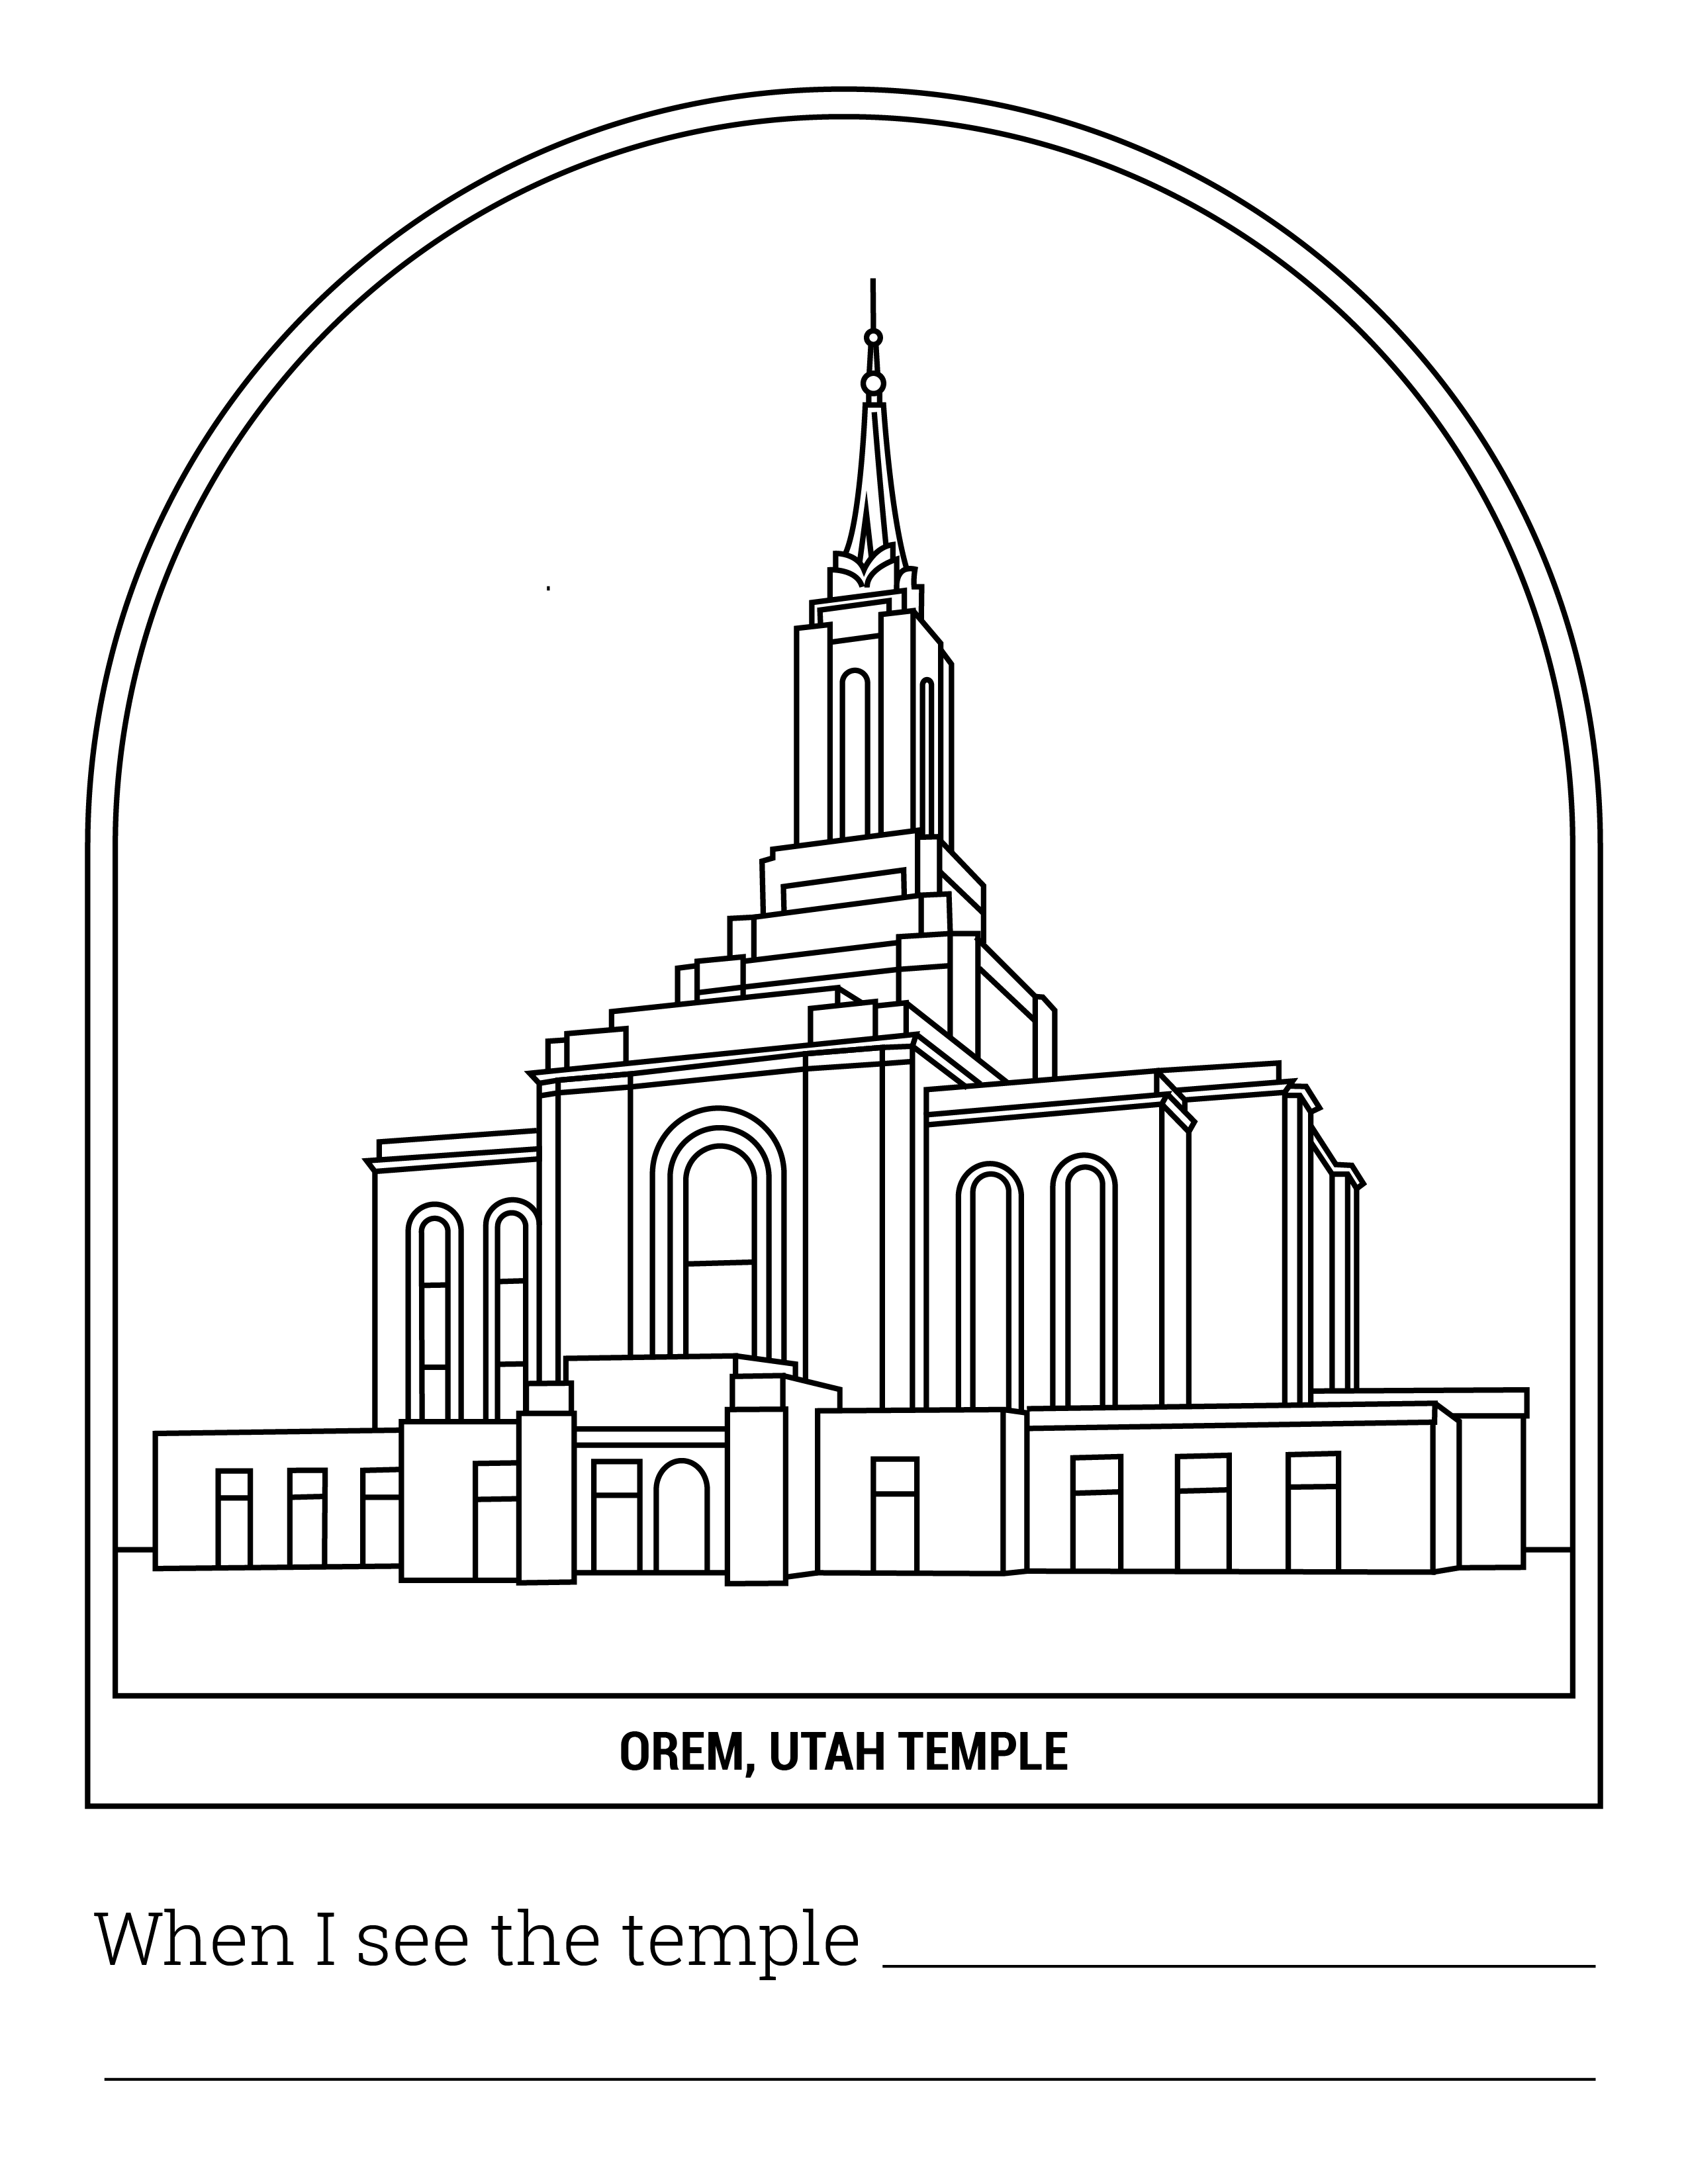 Orem temple coloring â latter day baby